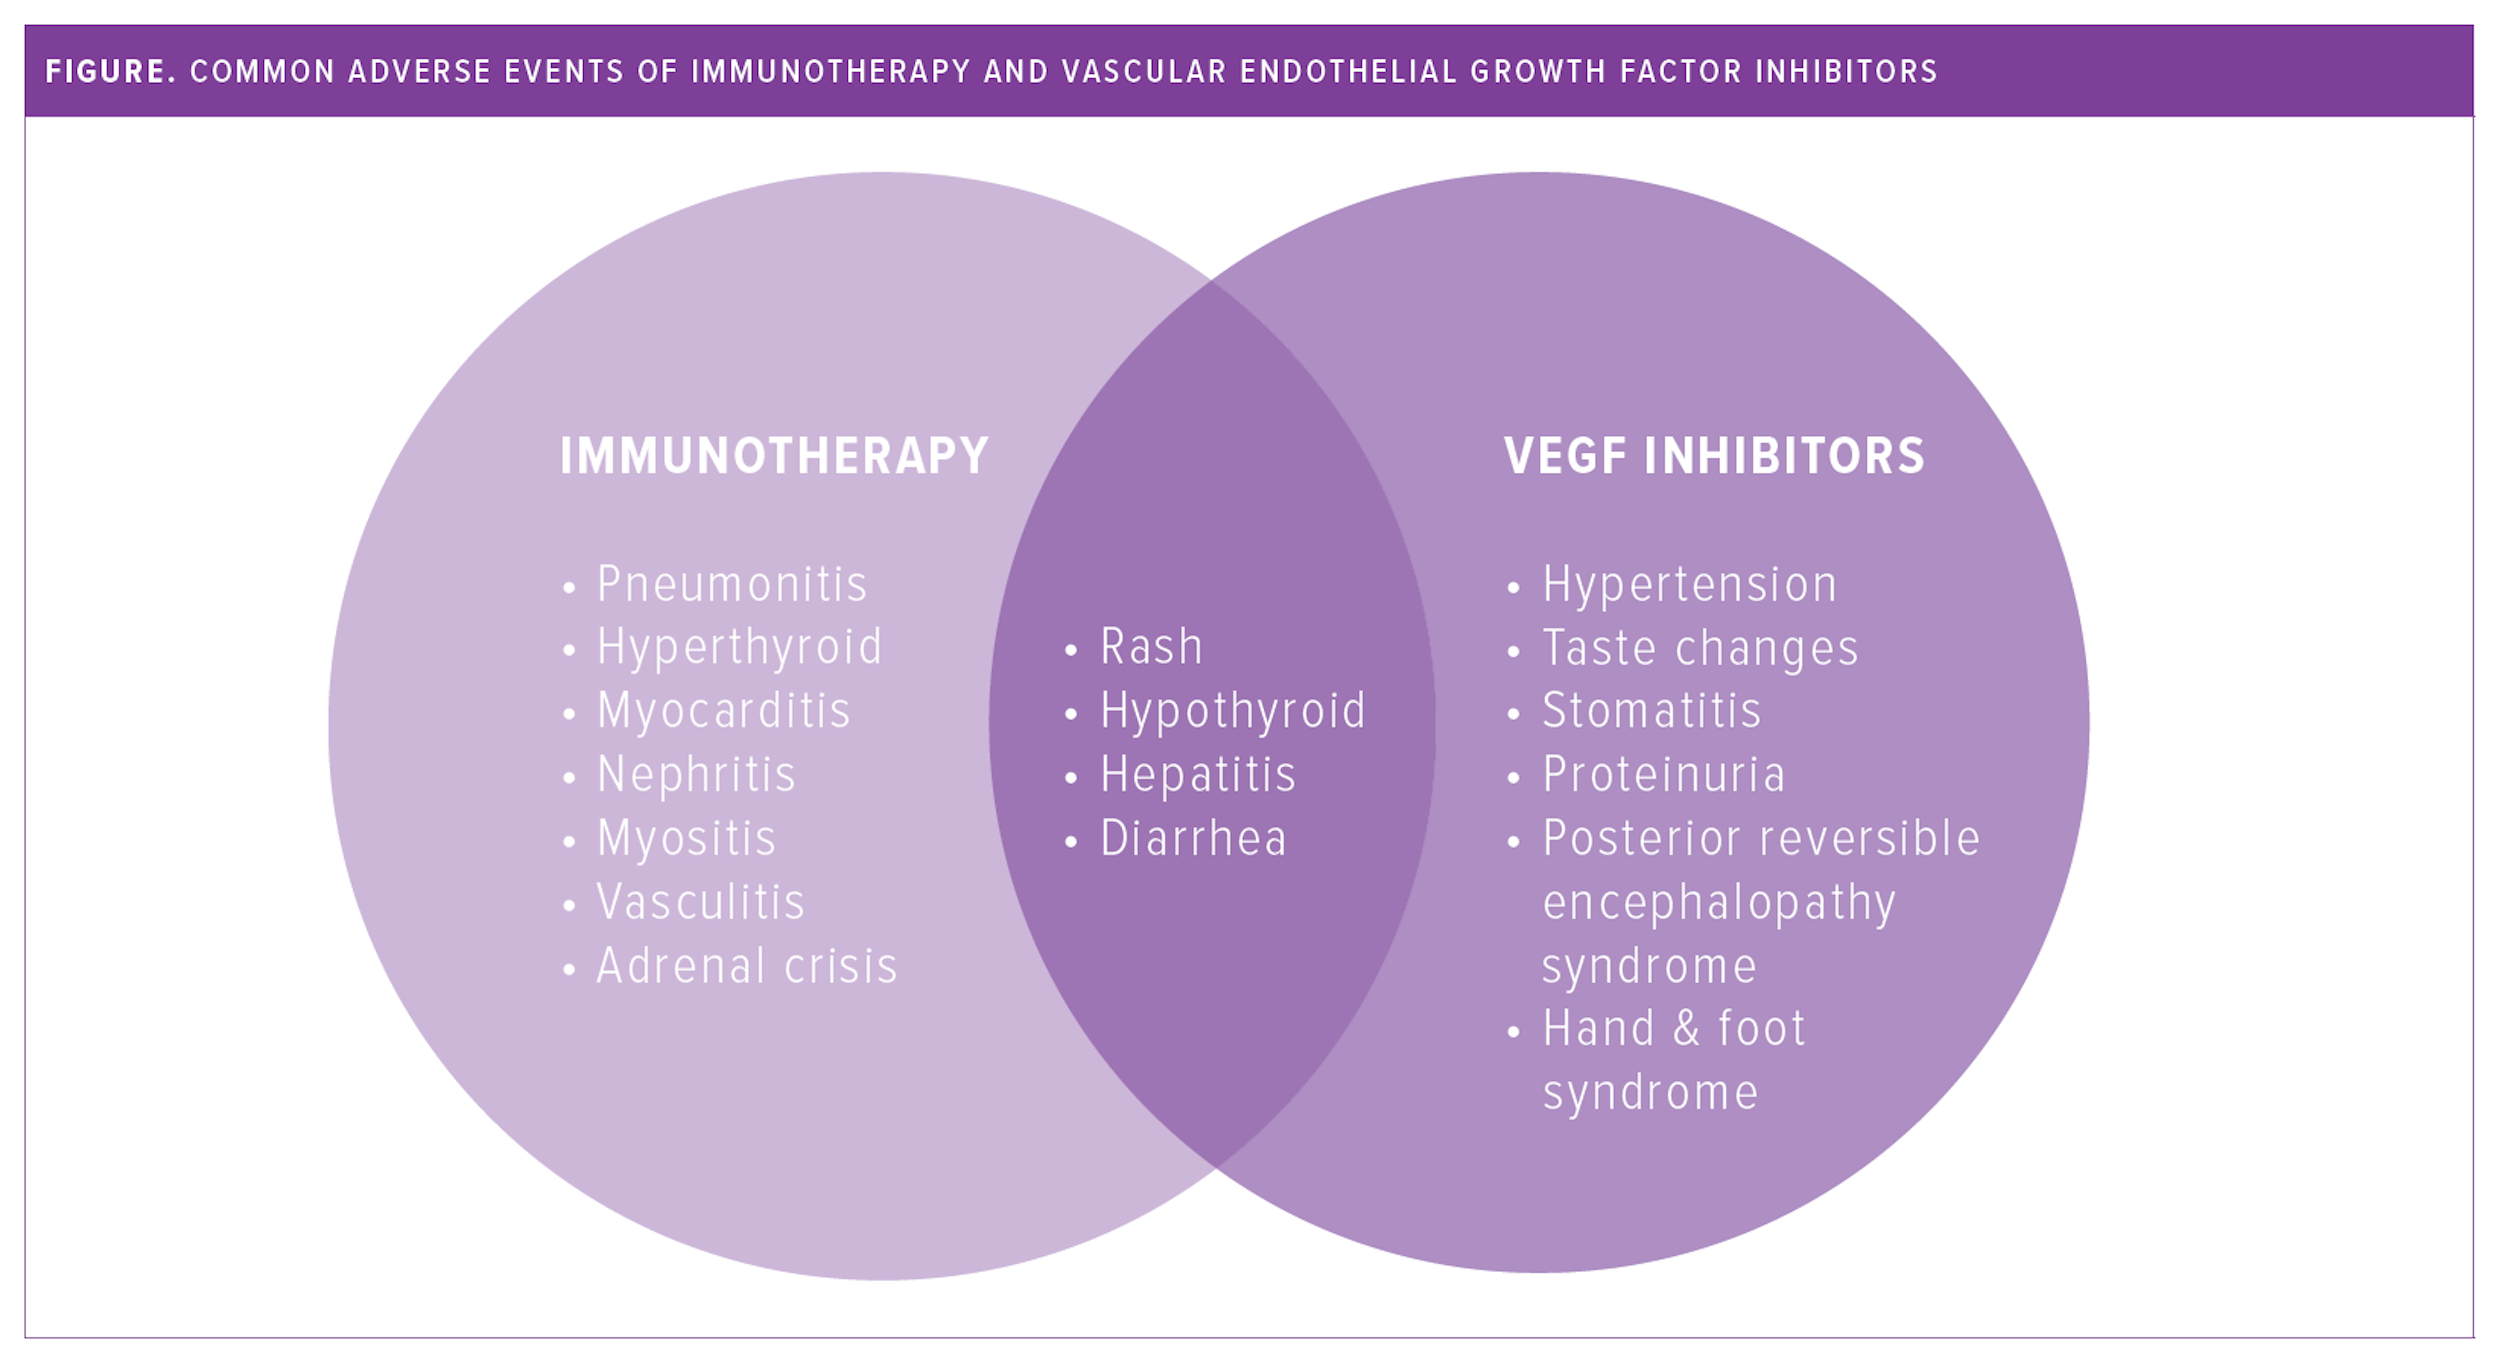 COMMON ADVERSE EVENTS OF IMMUNOTHERAPY AND VASCULAR ENDOTHELIAL GROWTH FACTOR INHIBITORS